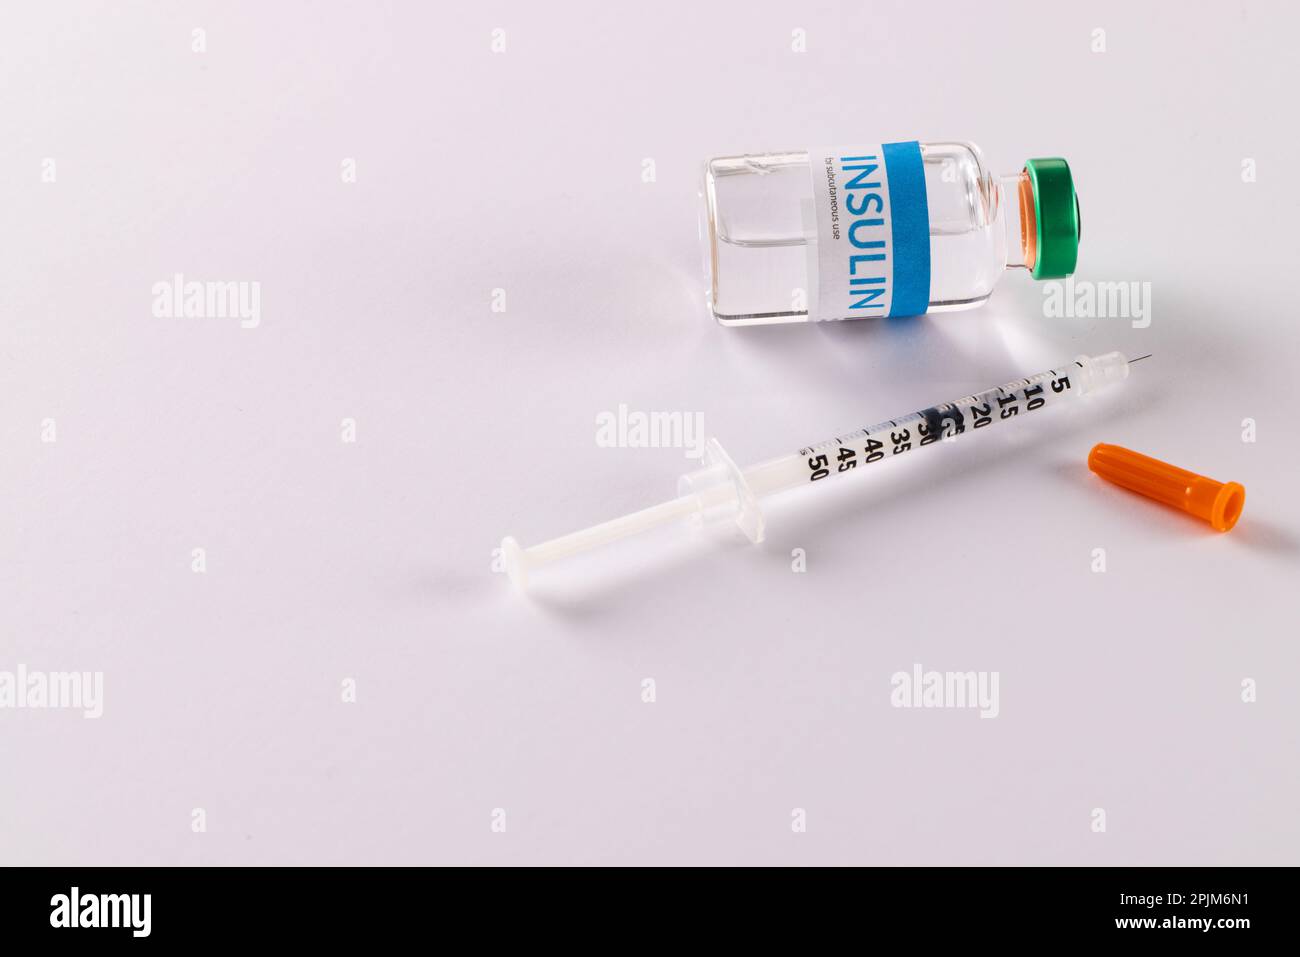 Insulin vial and uncapped syringe on white background with copy space Stock Photo